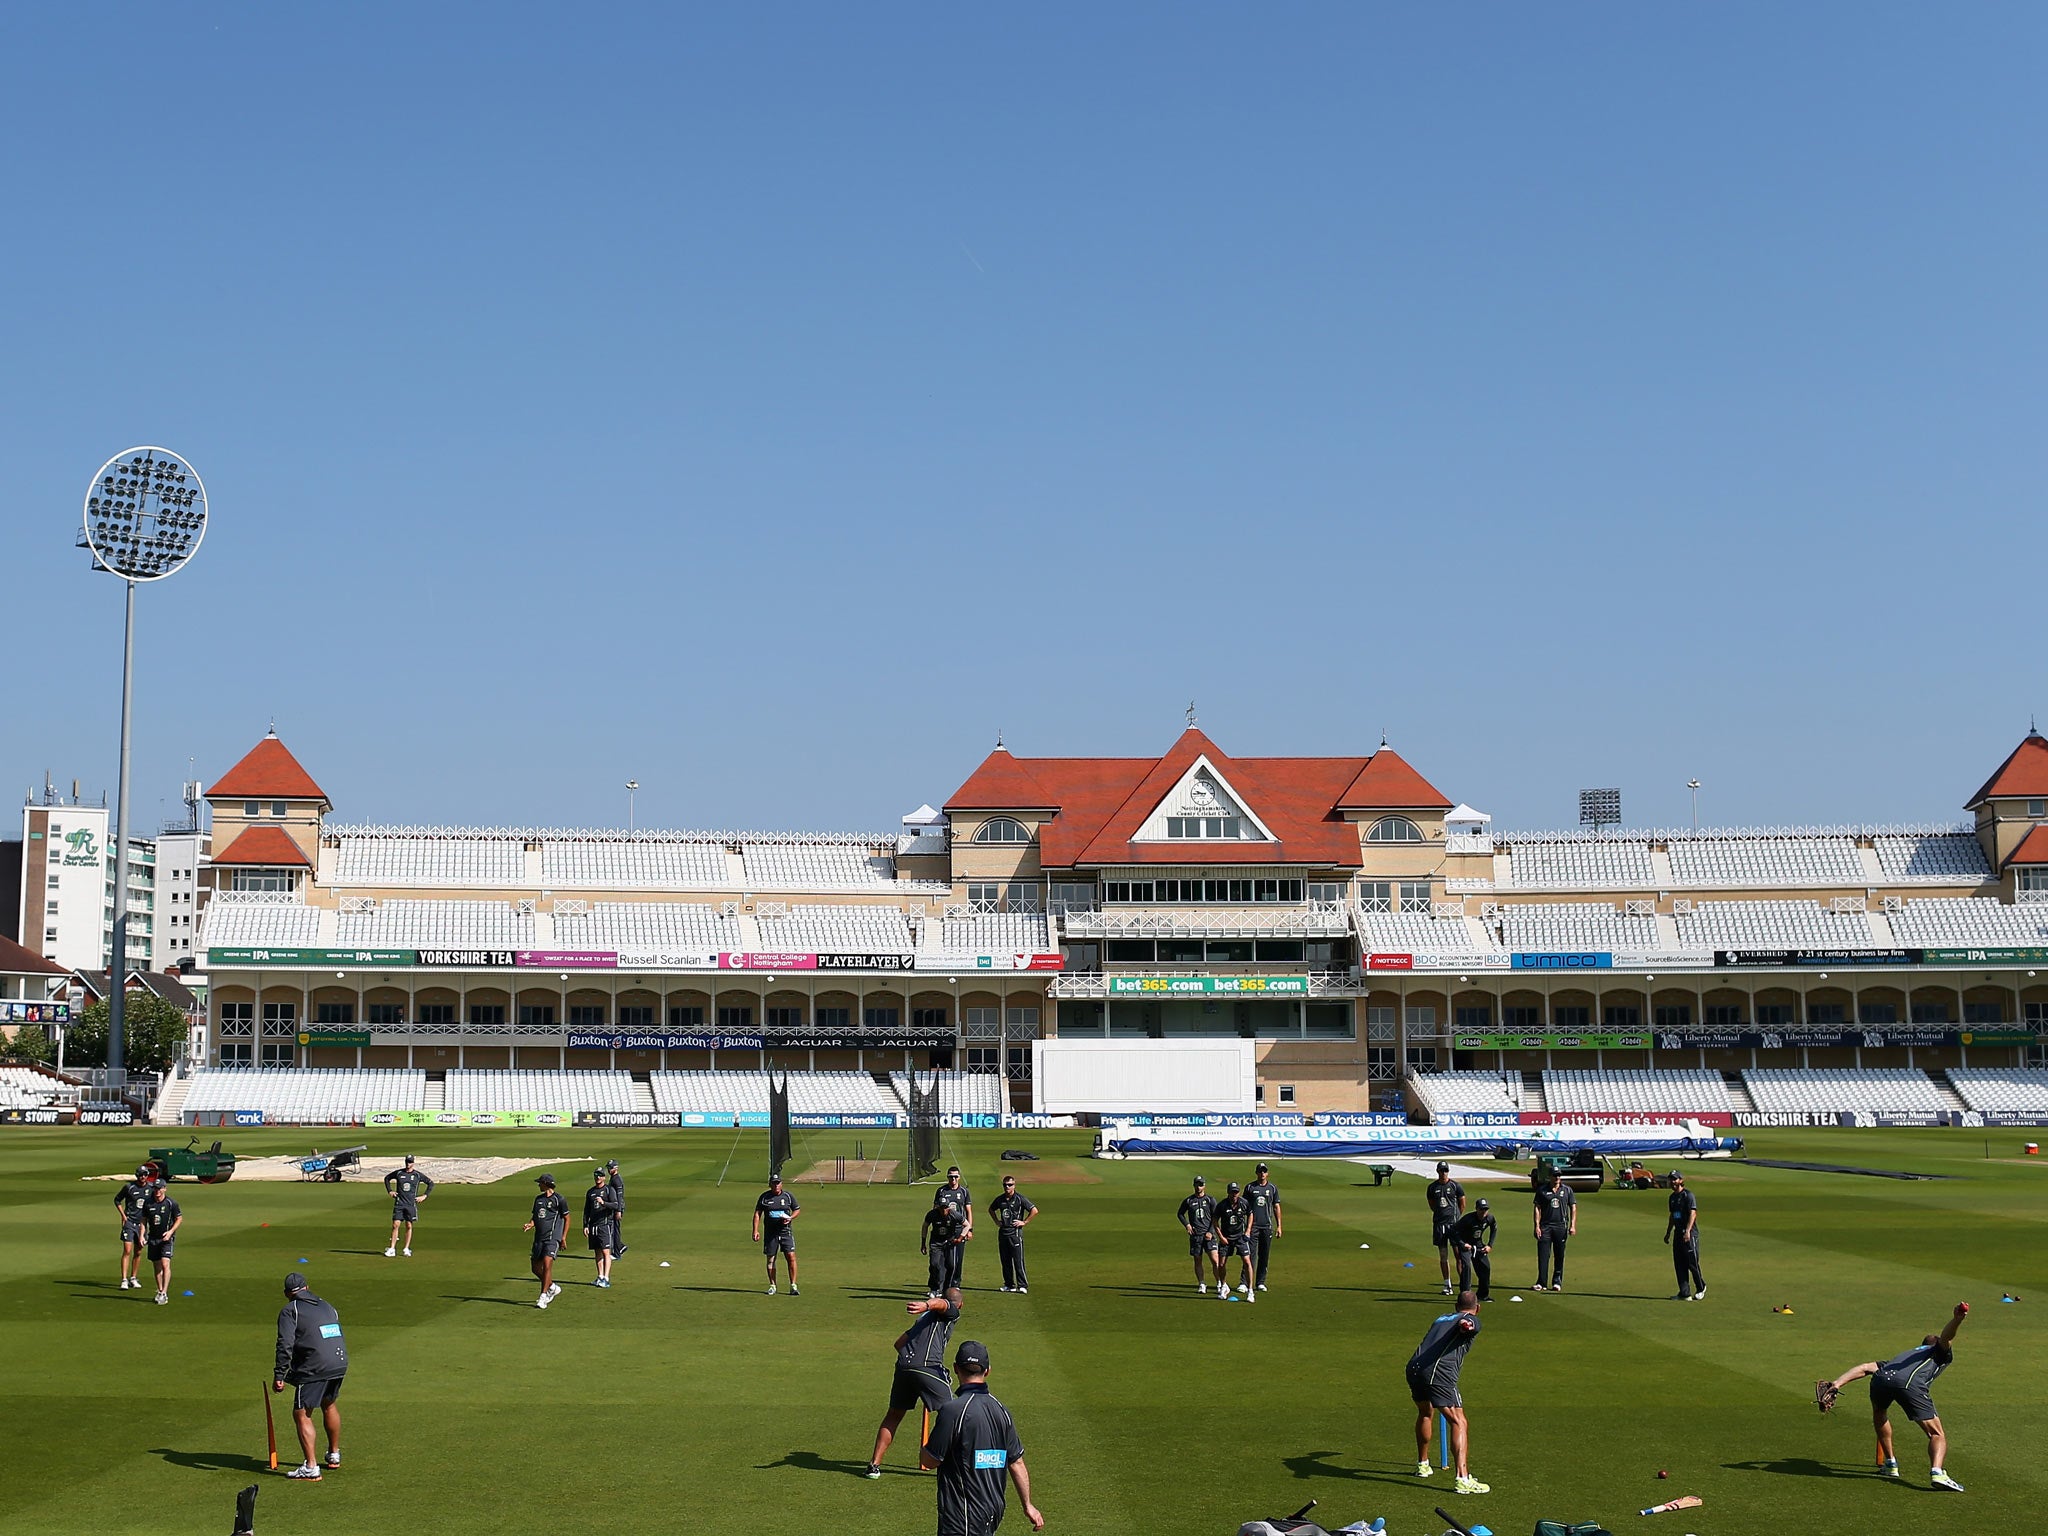 Trent Bridge is the venue for the first Test